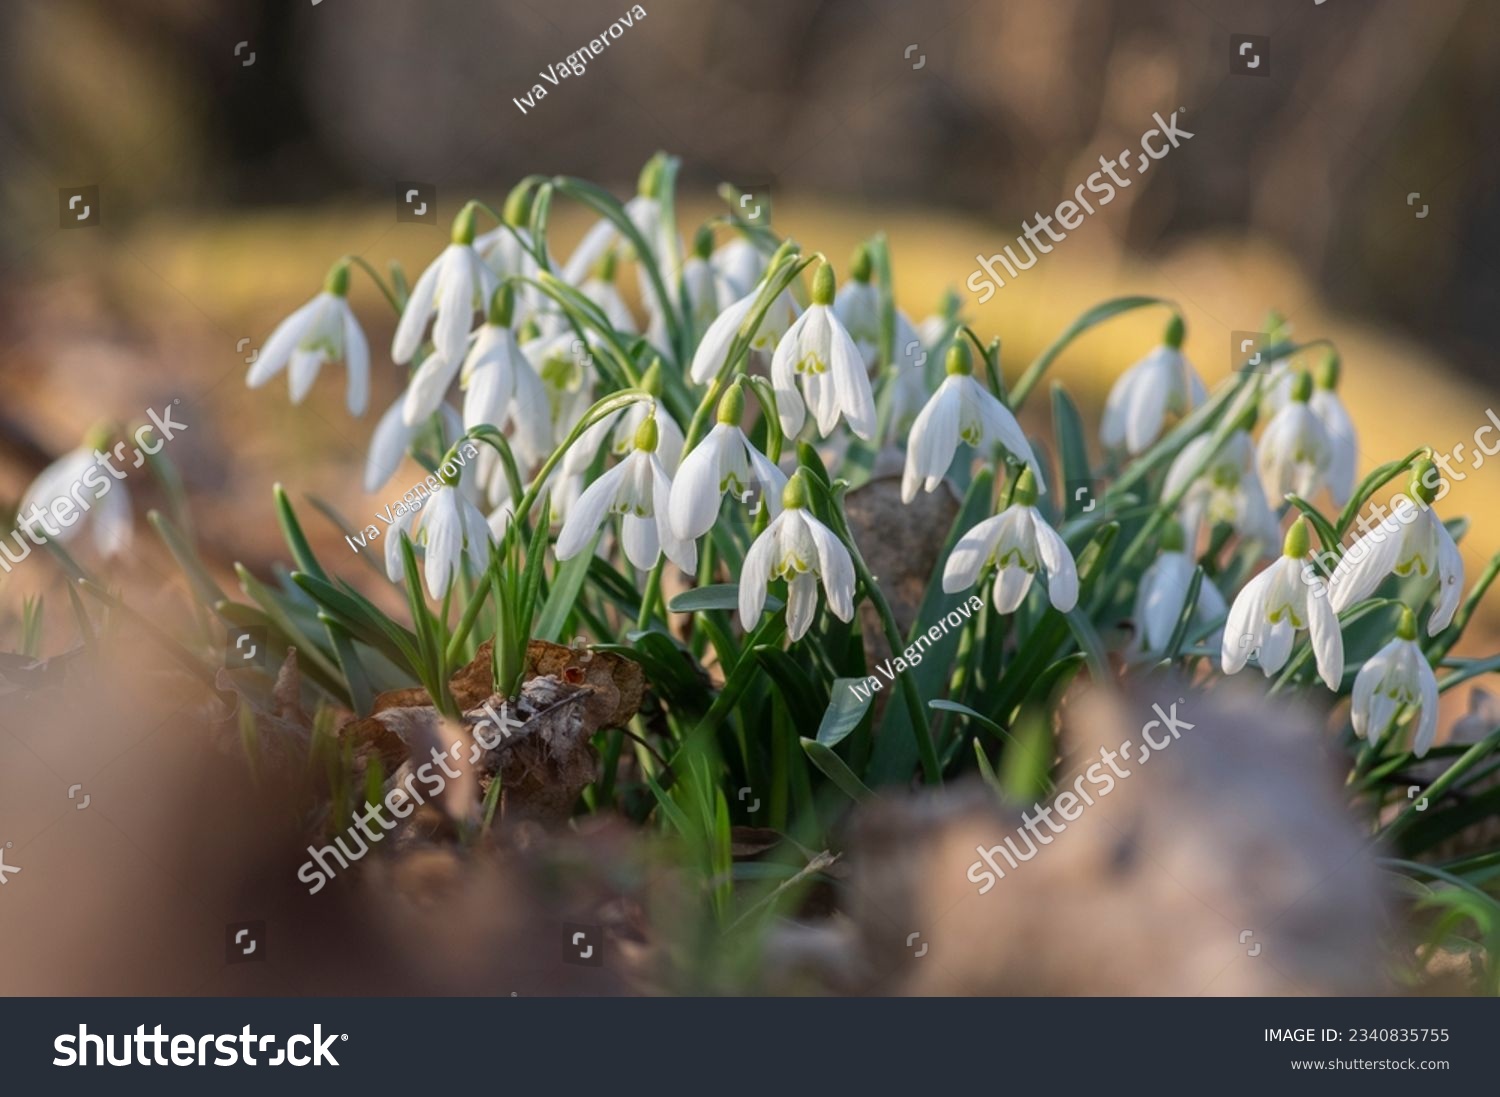 Galanthus nivalis flowering plants, bright white common snowdrop in bloom in sunlight daylight #2340835755